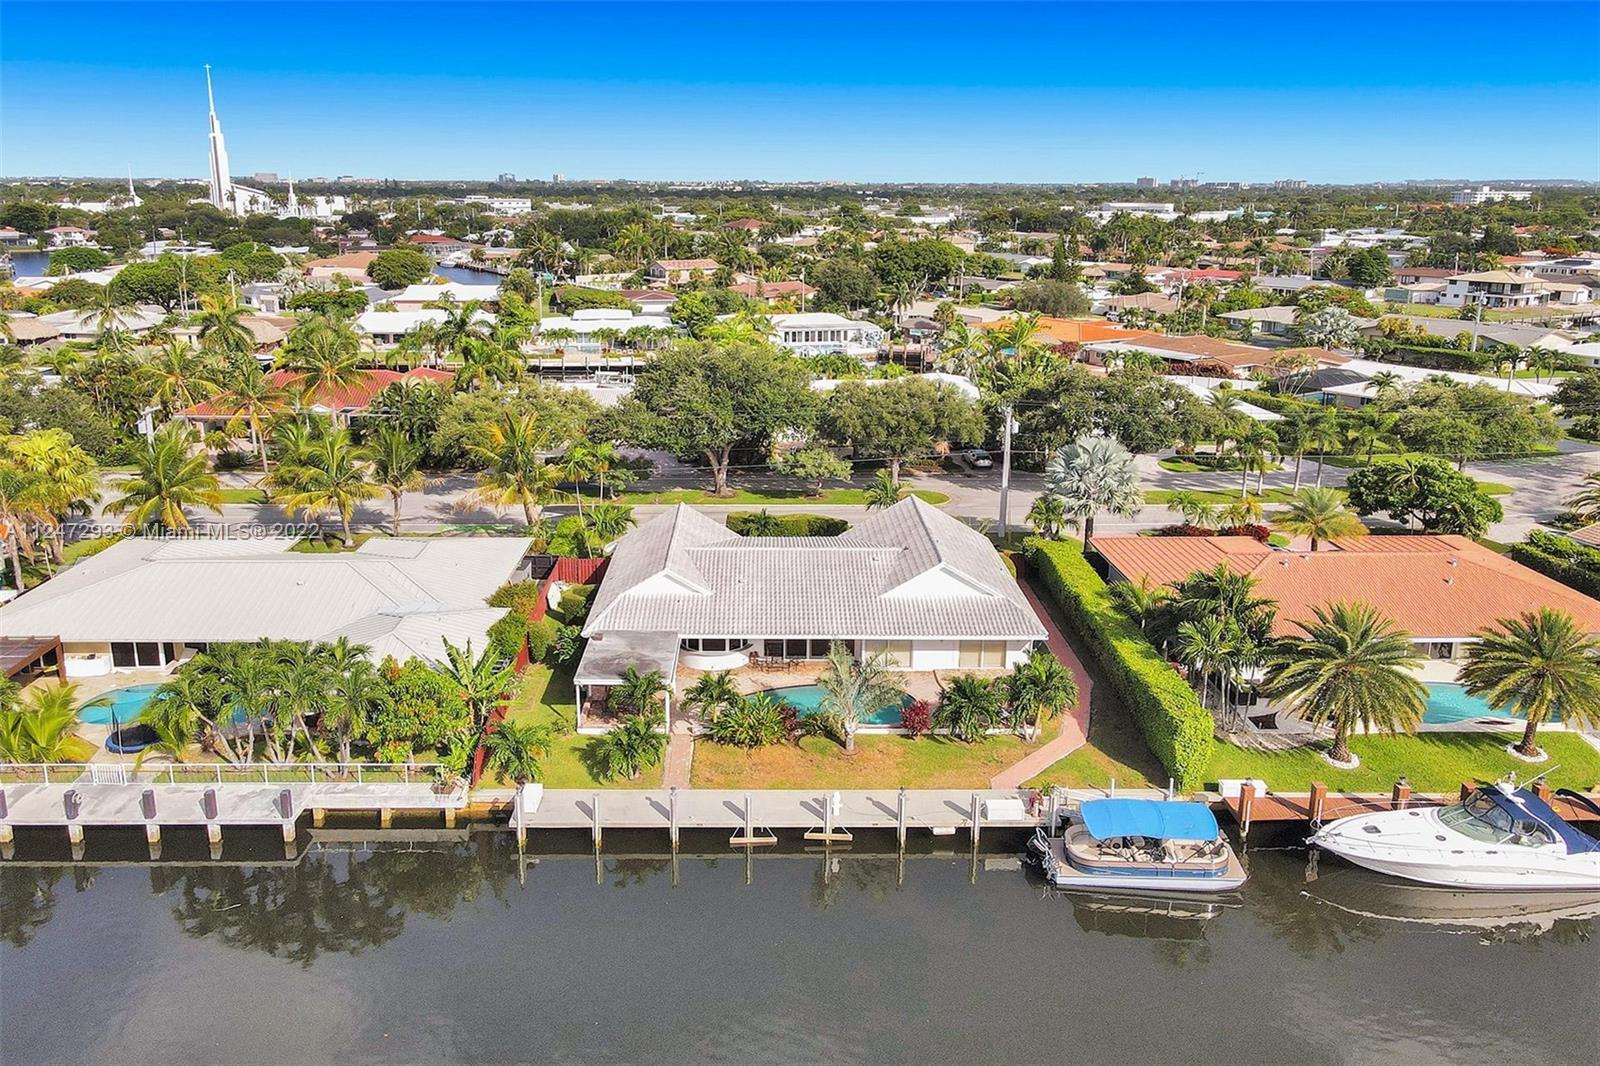 This impressive waterfront home sits on 100ft of deep water with NO FIXED bridges to the open ocean. Located in the prestigious "Landings" one of Ft Lauderdale's sought-after communities.Minutes to the beach,shopping & some of the finest restaurants.This open floor plan has a large master bedroom & bath, 2 additional bedrooms plus a den/office. A remarkable large open kitchen for entertaining family or guests. Every room has wonderful natural light.Separate Laundry room w/2 car garage. Outside you have a large patio for cookouts, lounging or taking a swim in the heated pool that overlooks a wide Intracoastal canal.  Bring your YACHT and tie up to this beautiful concrete dock that accompanies 100 AMP shore power. This home is a boater's dream & the true lifestyle of living in South Florida.